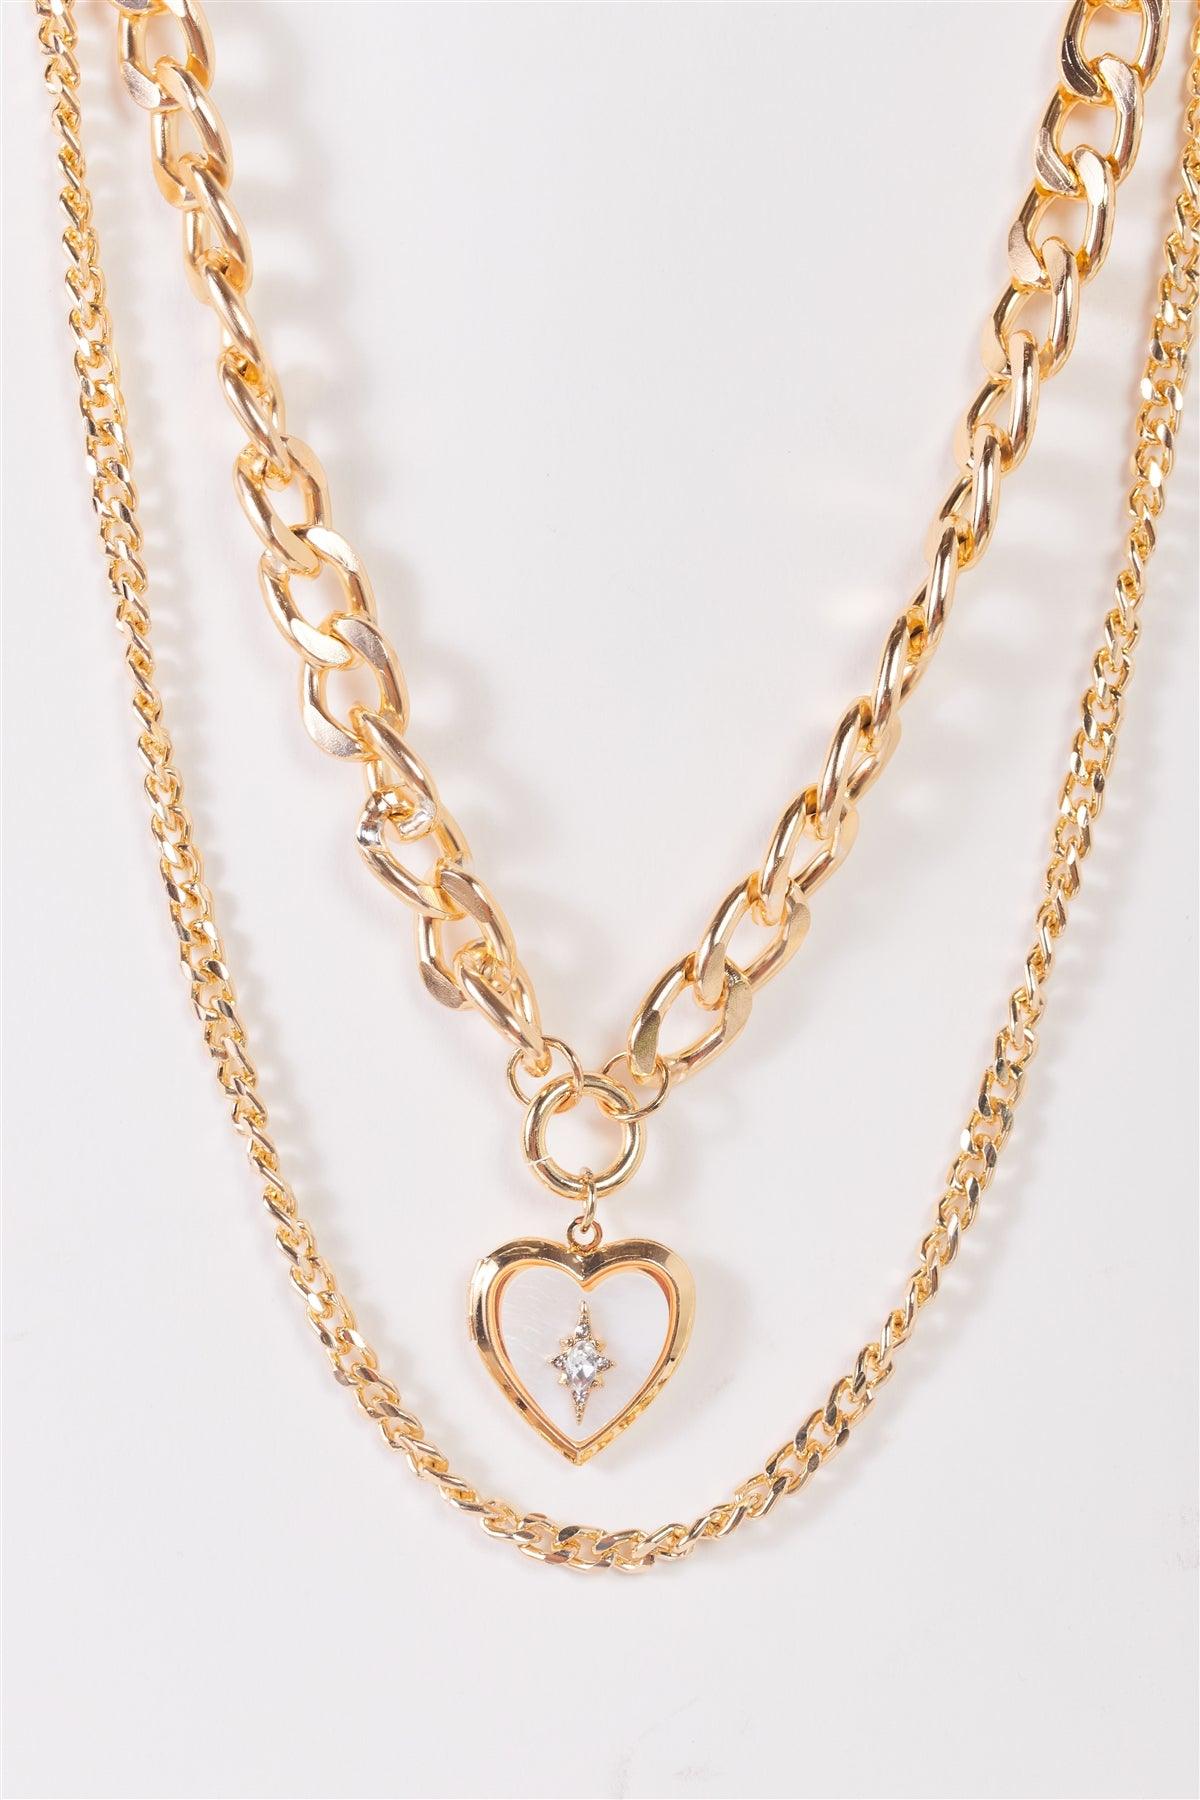 "Sailor Moon" Gold Chunky Link Chain With White Pearl Heart Medallion Set Necklace /3 Pieces